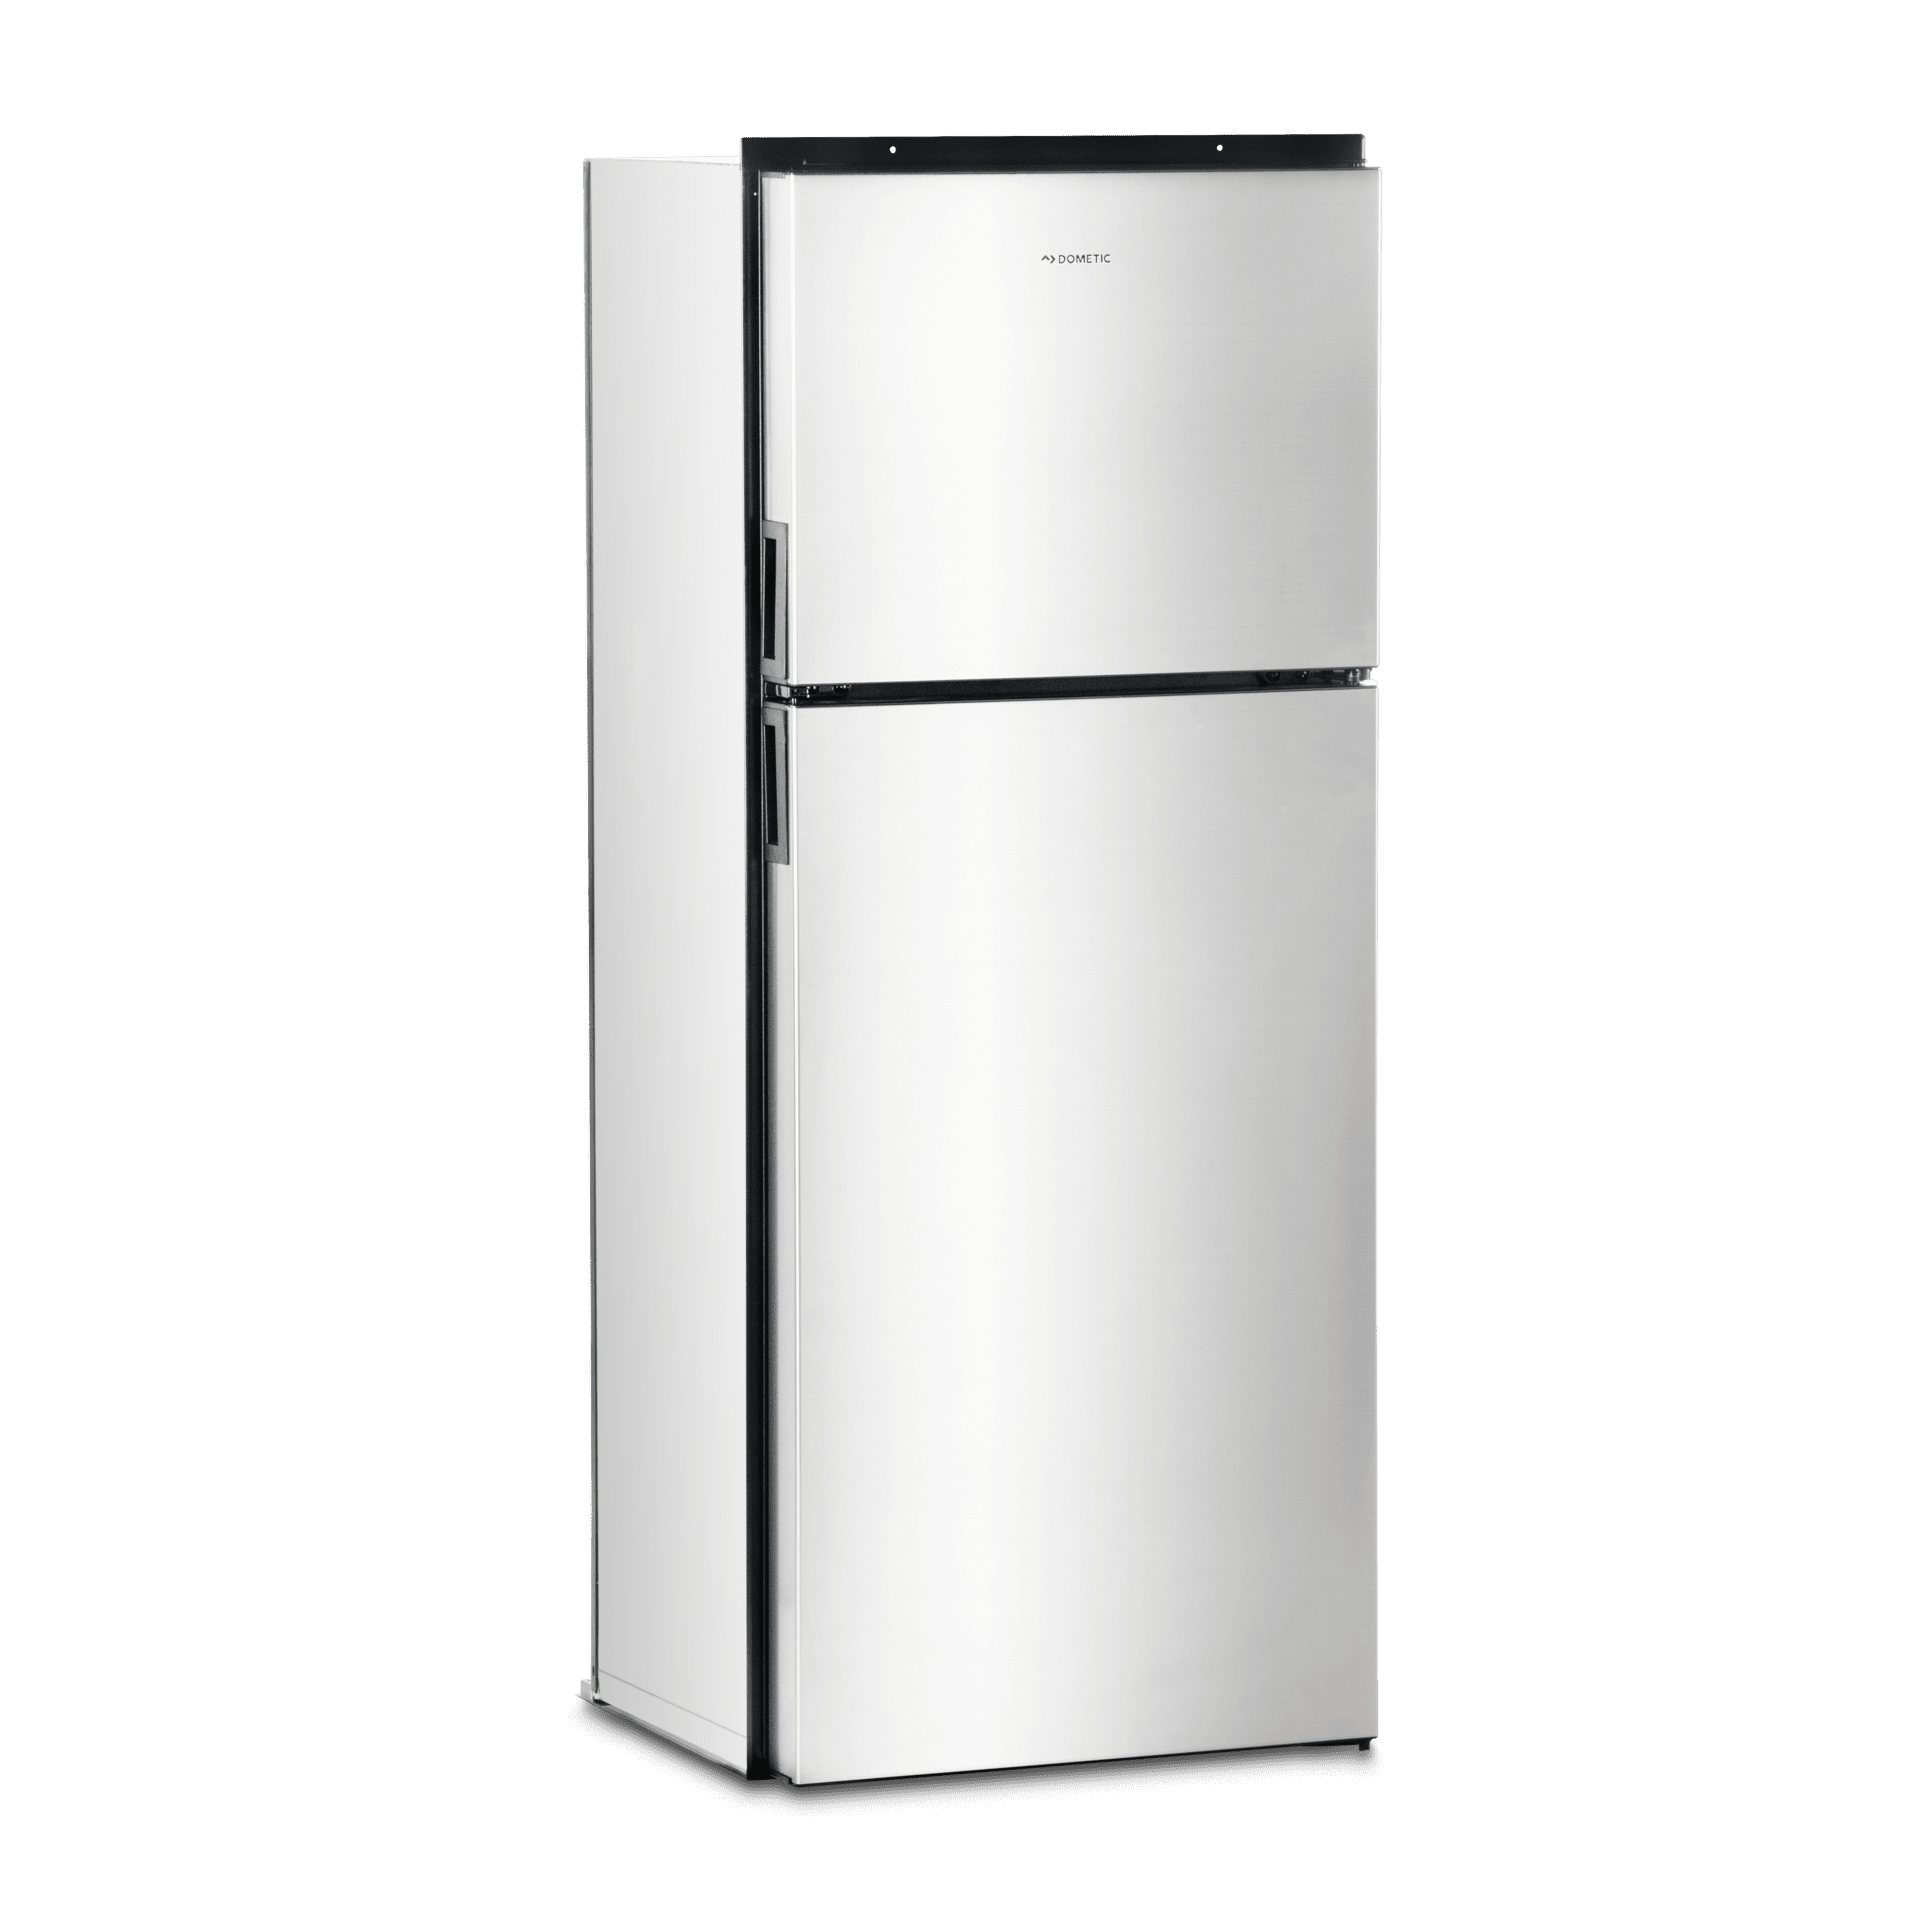 Dometic DM 2683 - Absorption Refrigerator, 6 cu ft, right hinged